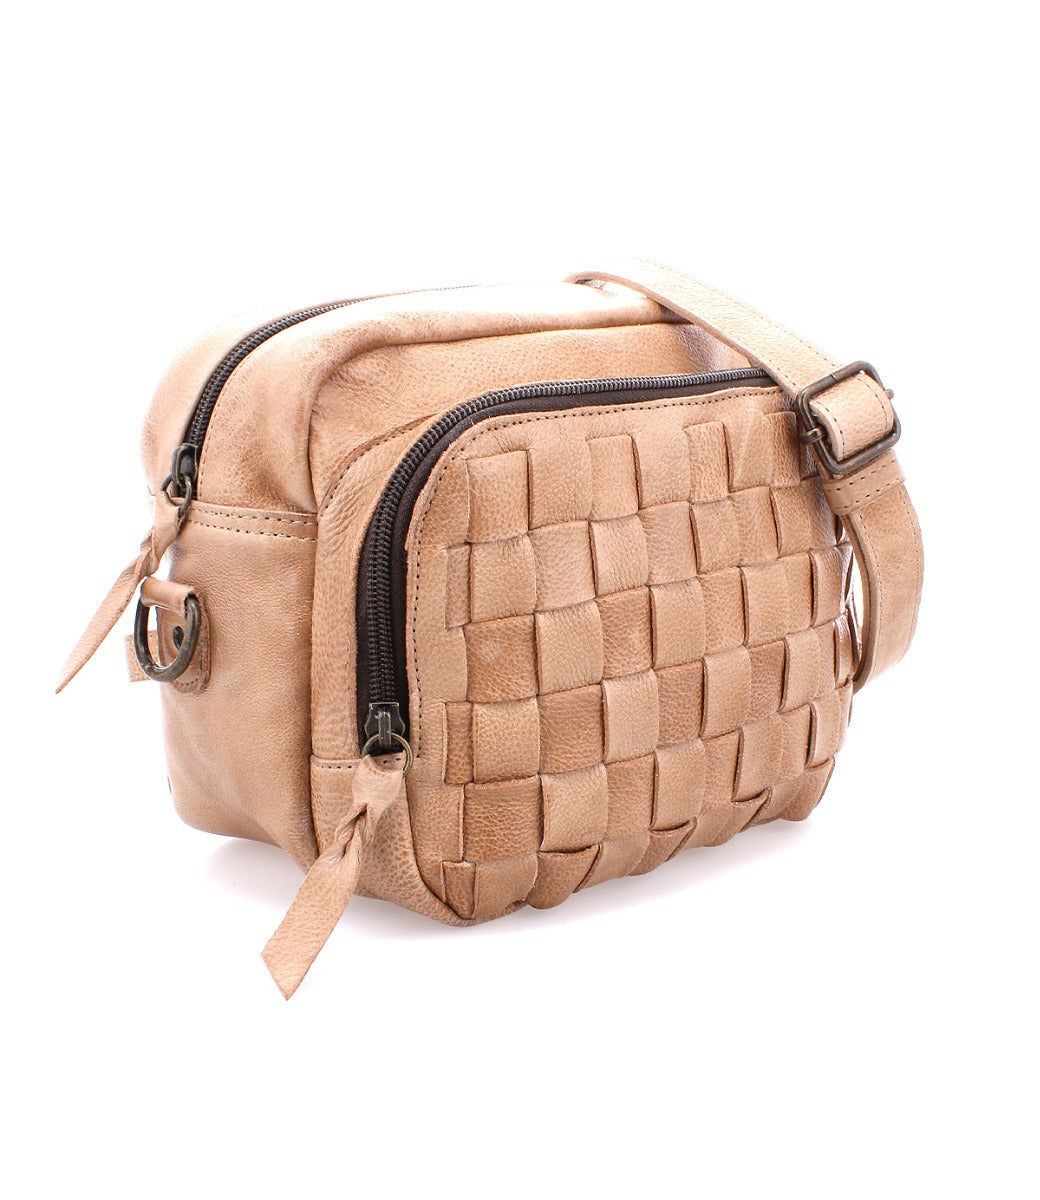 A beige Joshebed cross body bag with a zipper by Bed Stu.